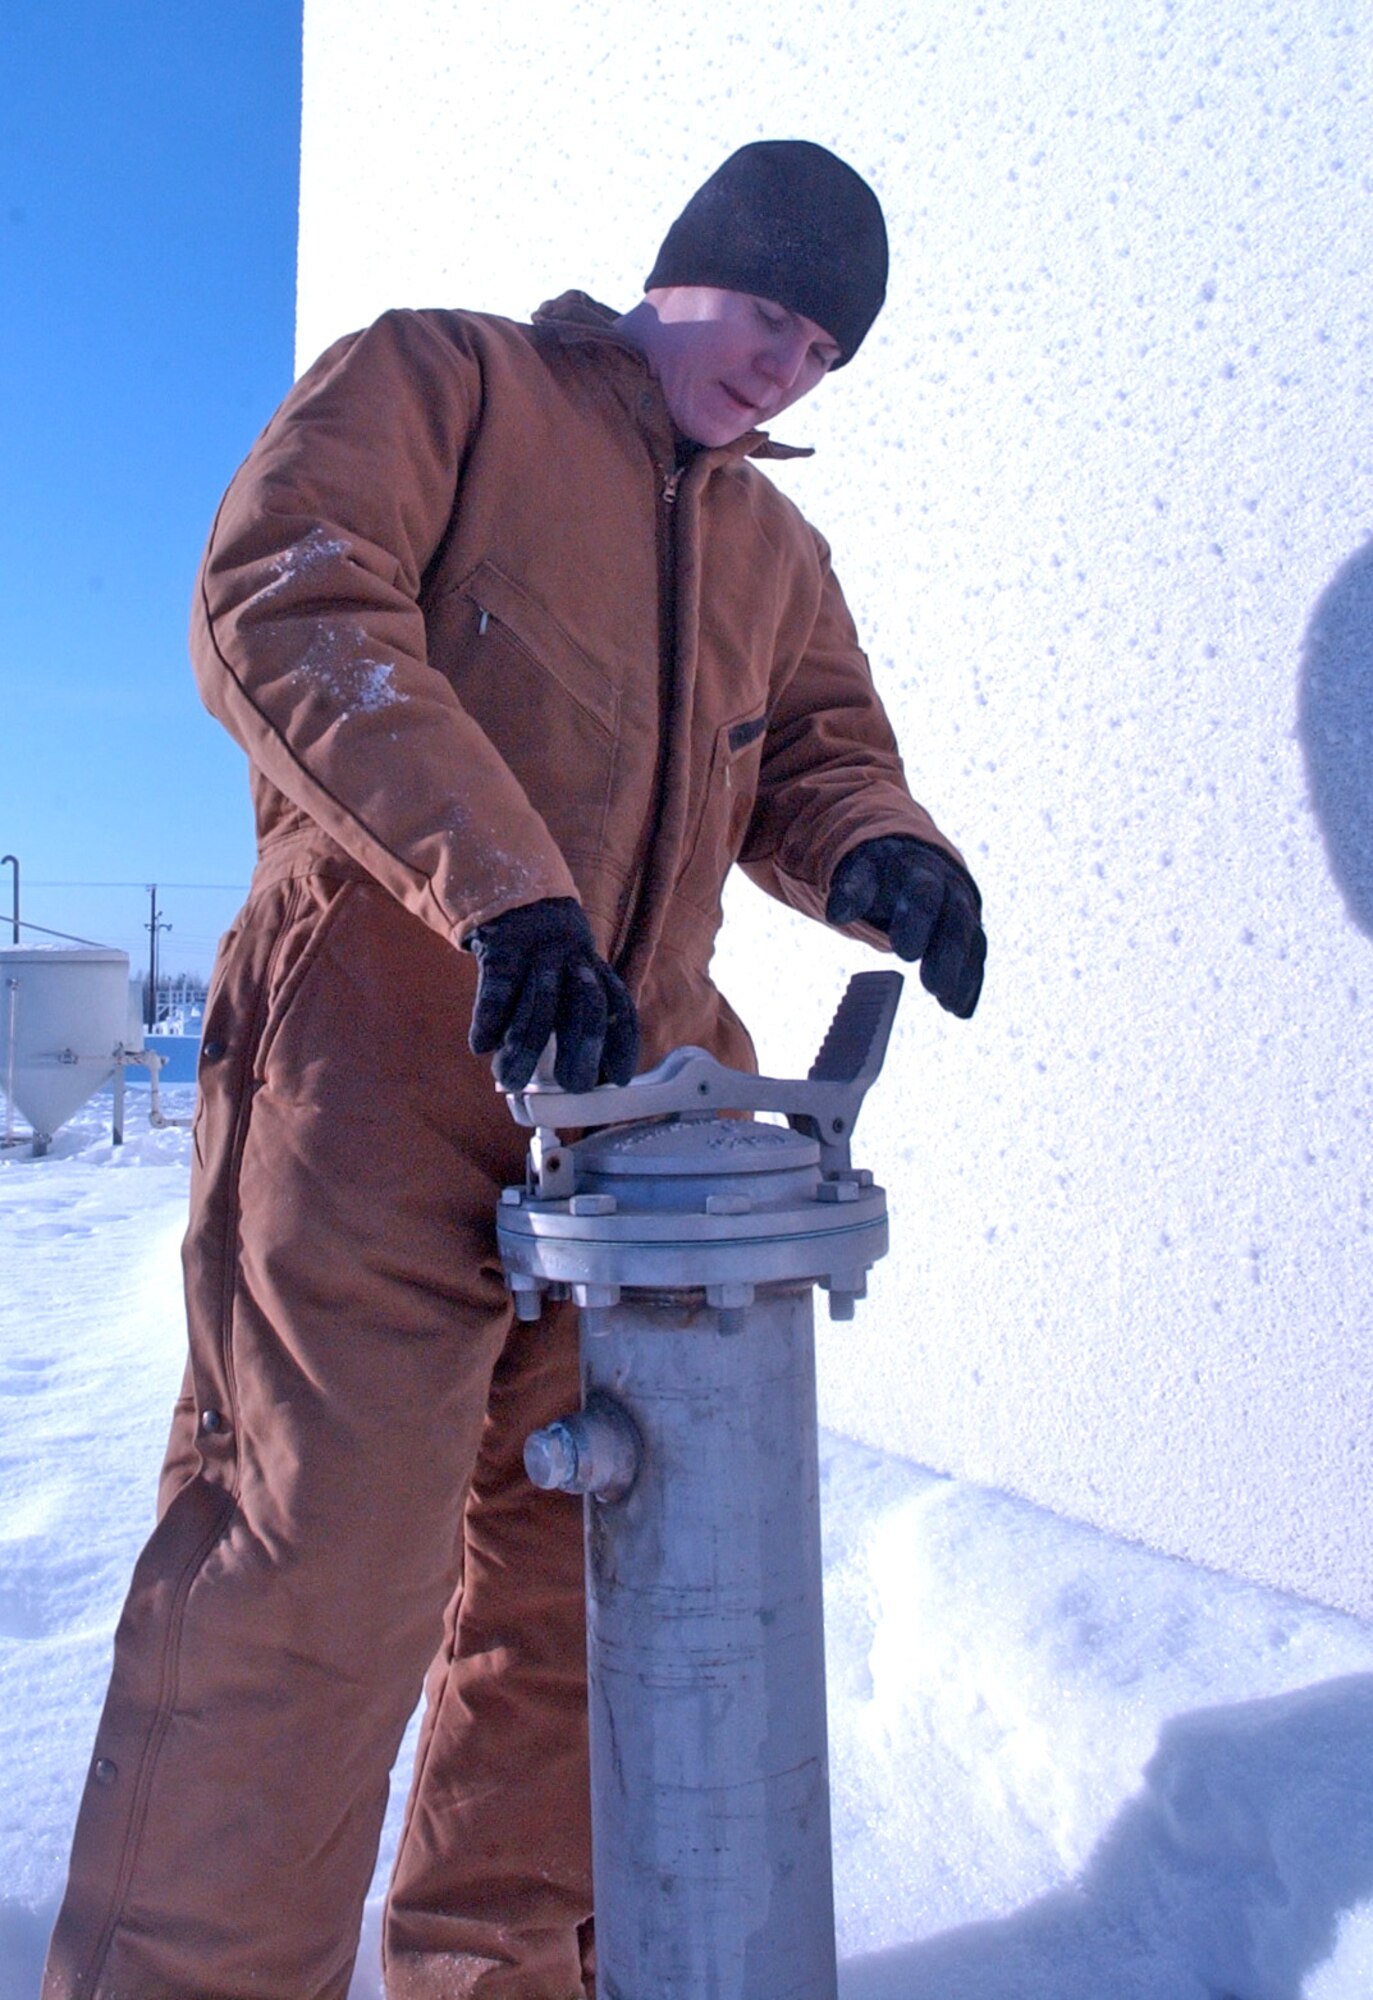 EIELSON AIR FORCE, Alaska -- Staff Sgt. Kyle Evans, 354th Logistics Squadron, inspecs a "Tell Tale" pipe used to detect any leaks under a bulk fuels storage tank. Working at the farthest-north Air Force base in the world - located 150 miles south of the Arctic Circle - presents these Airmen with challenges some have never faced before. (U.S. Air Force photo by Senior Airman Justin Weaver)